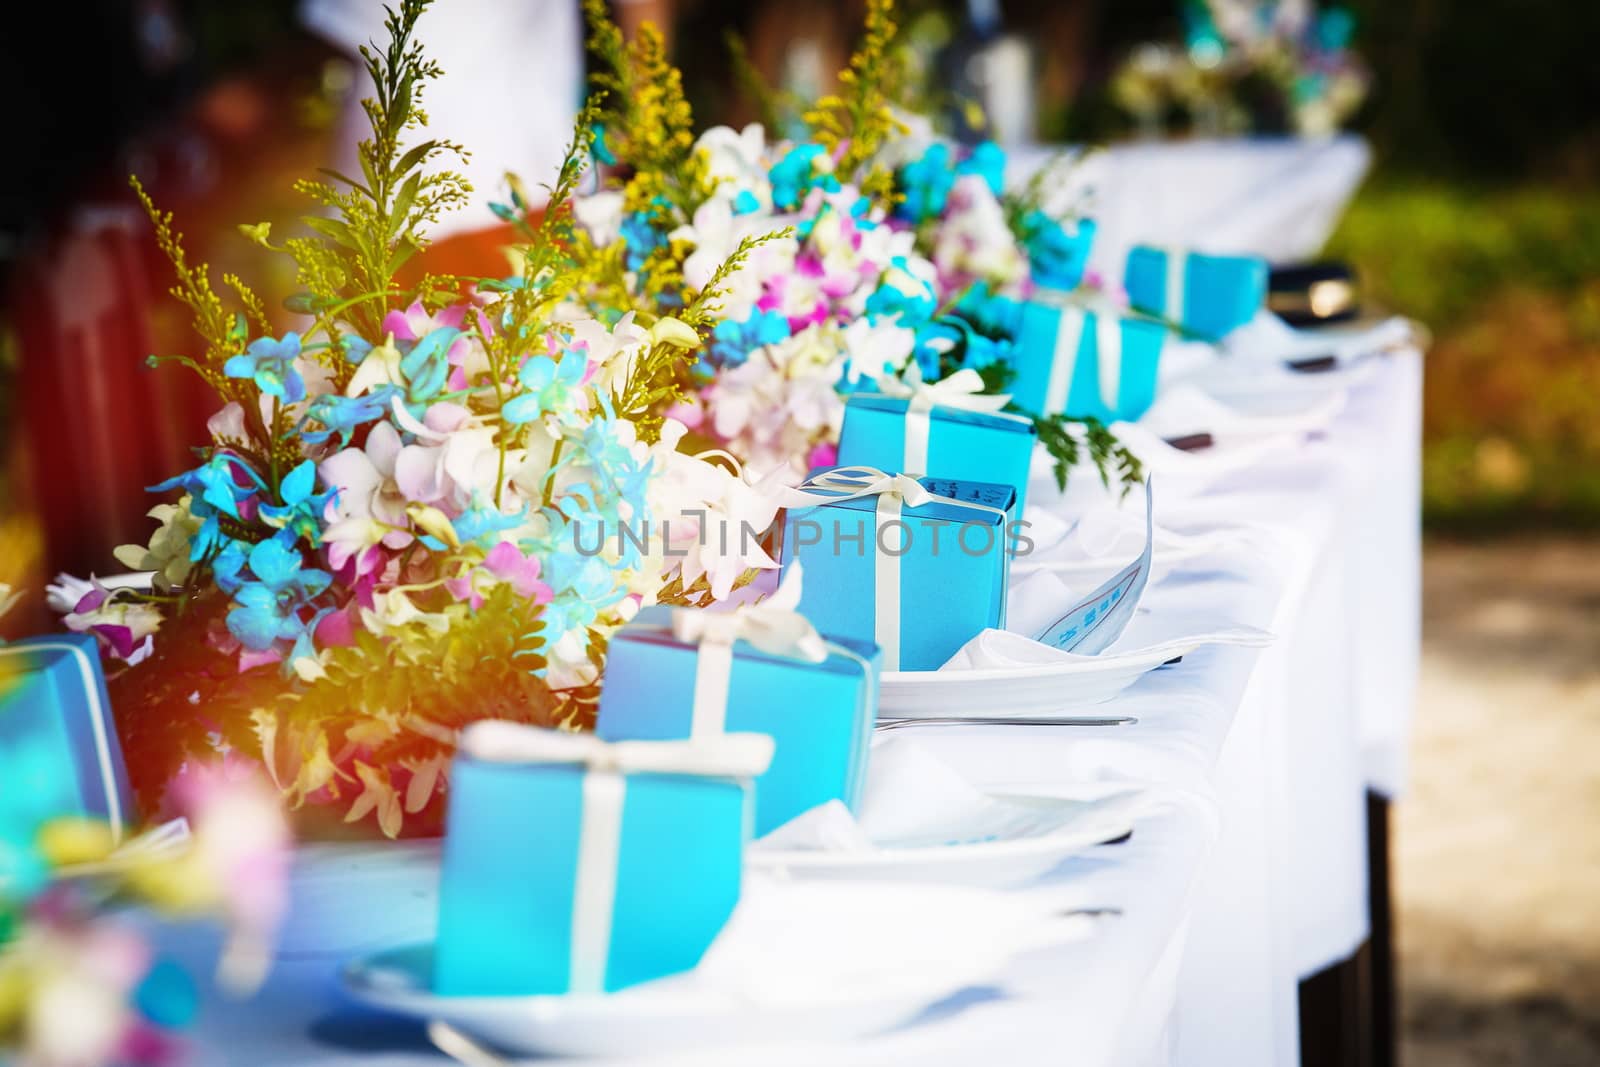 Laid wedding table with gifts and flowers